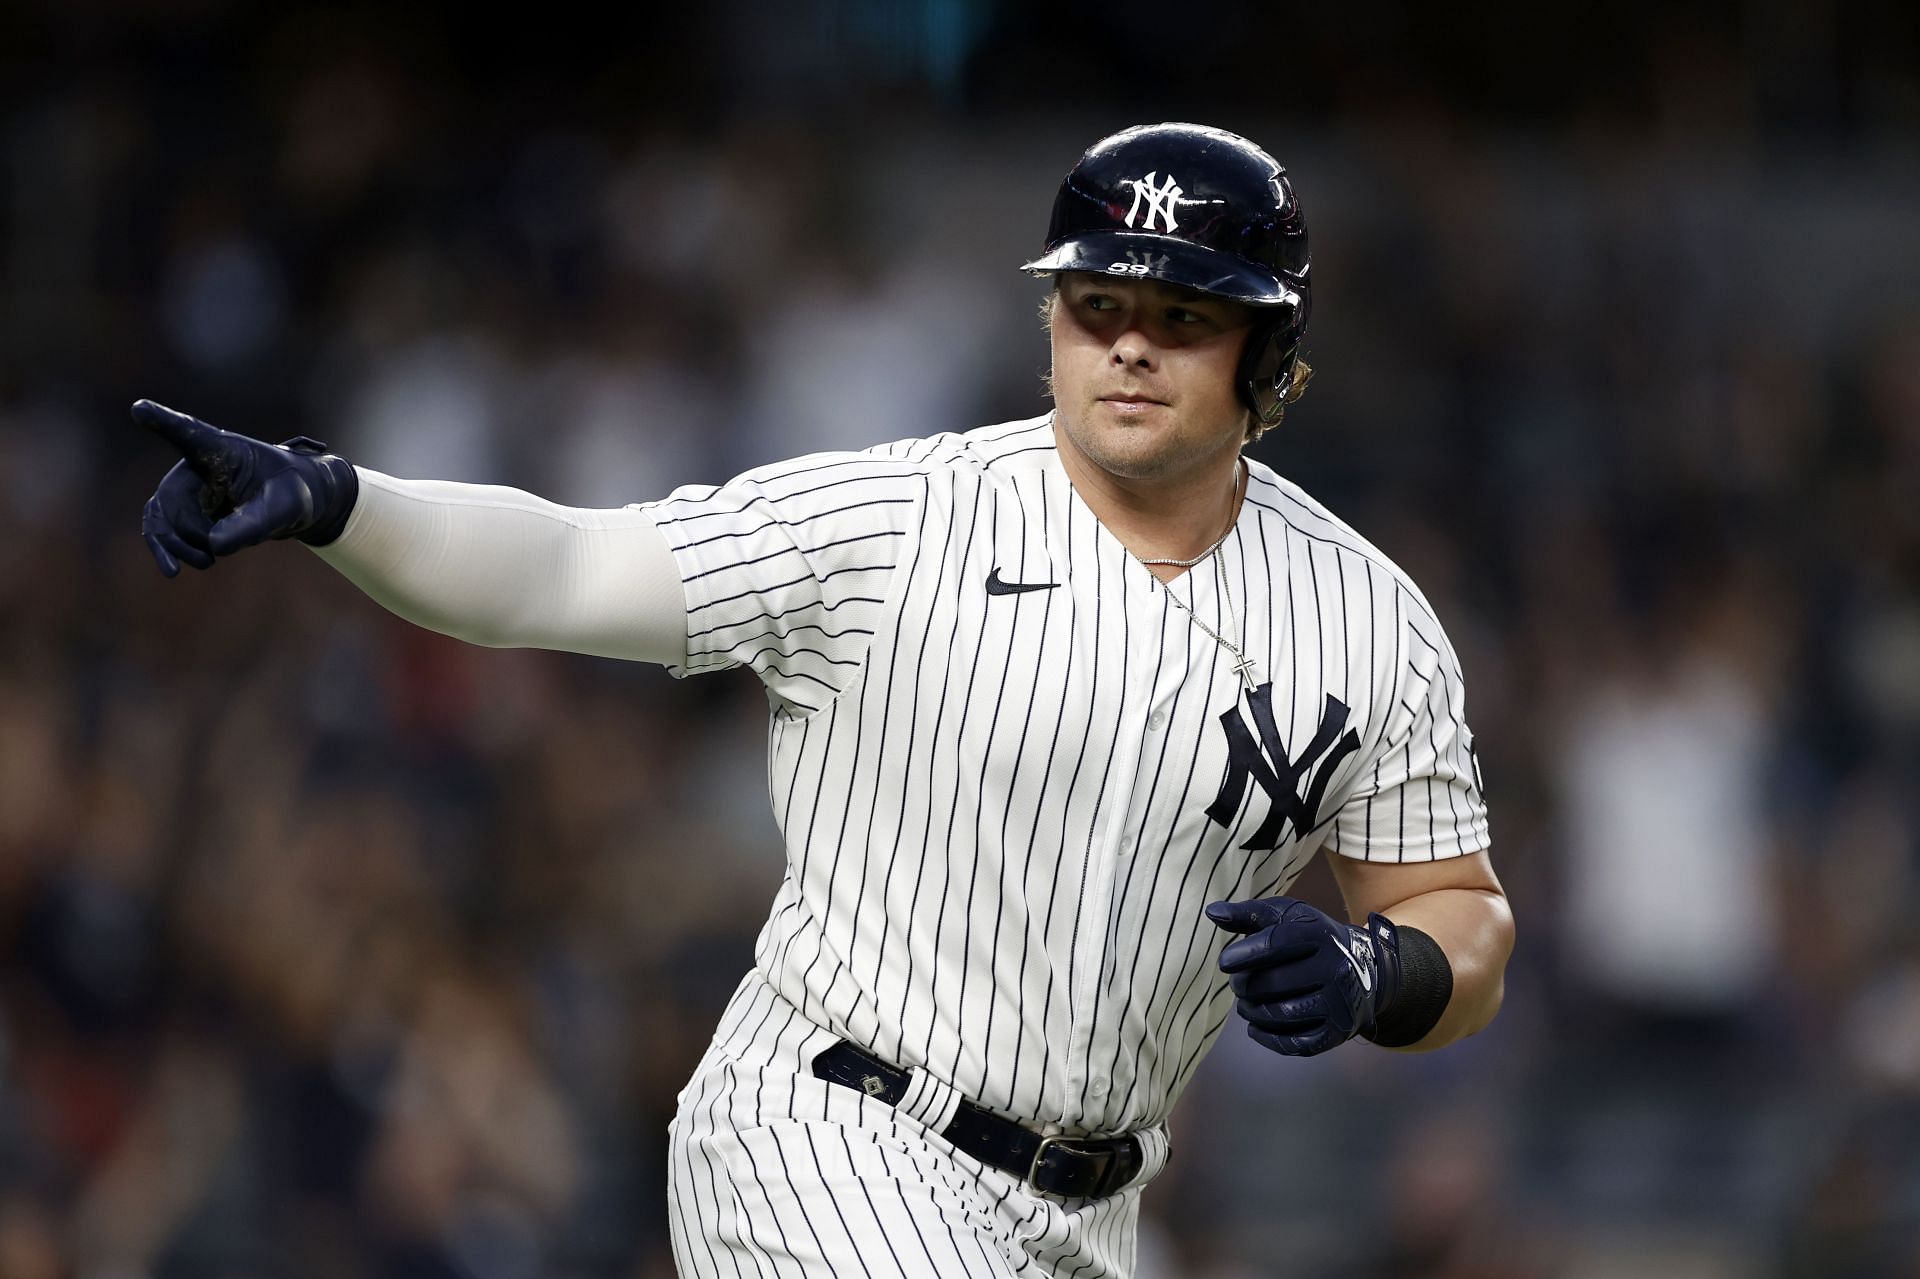 Luke Voit on the move to the West Coast